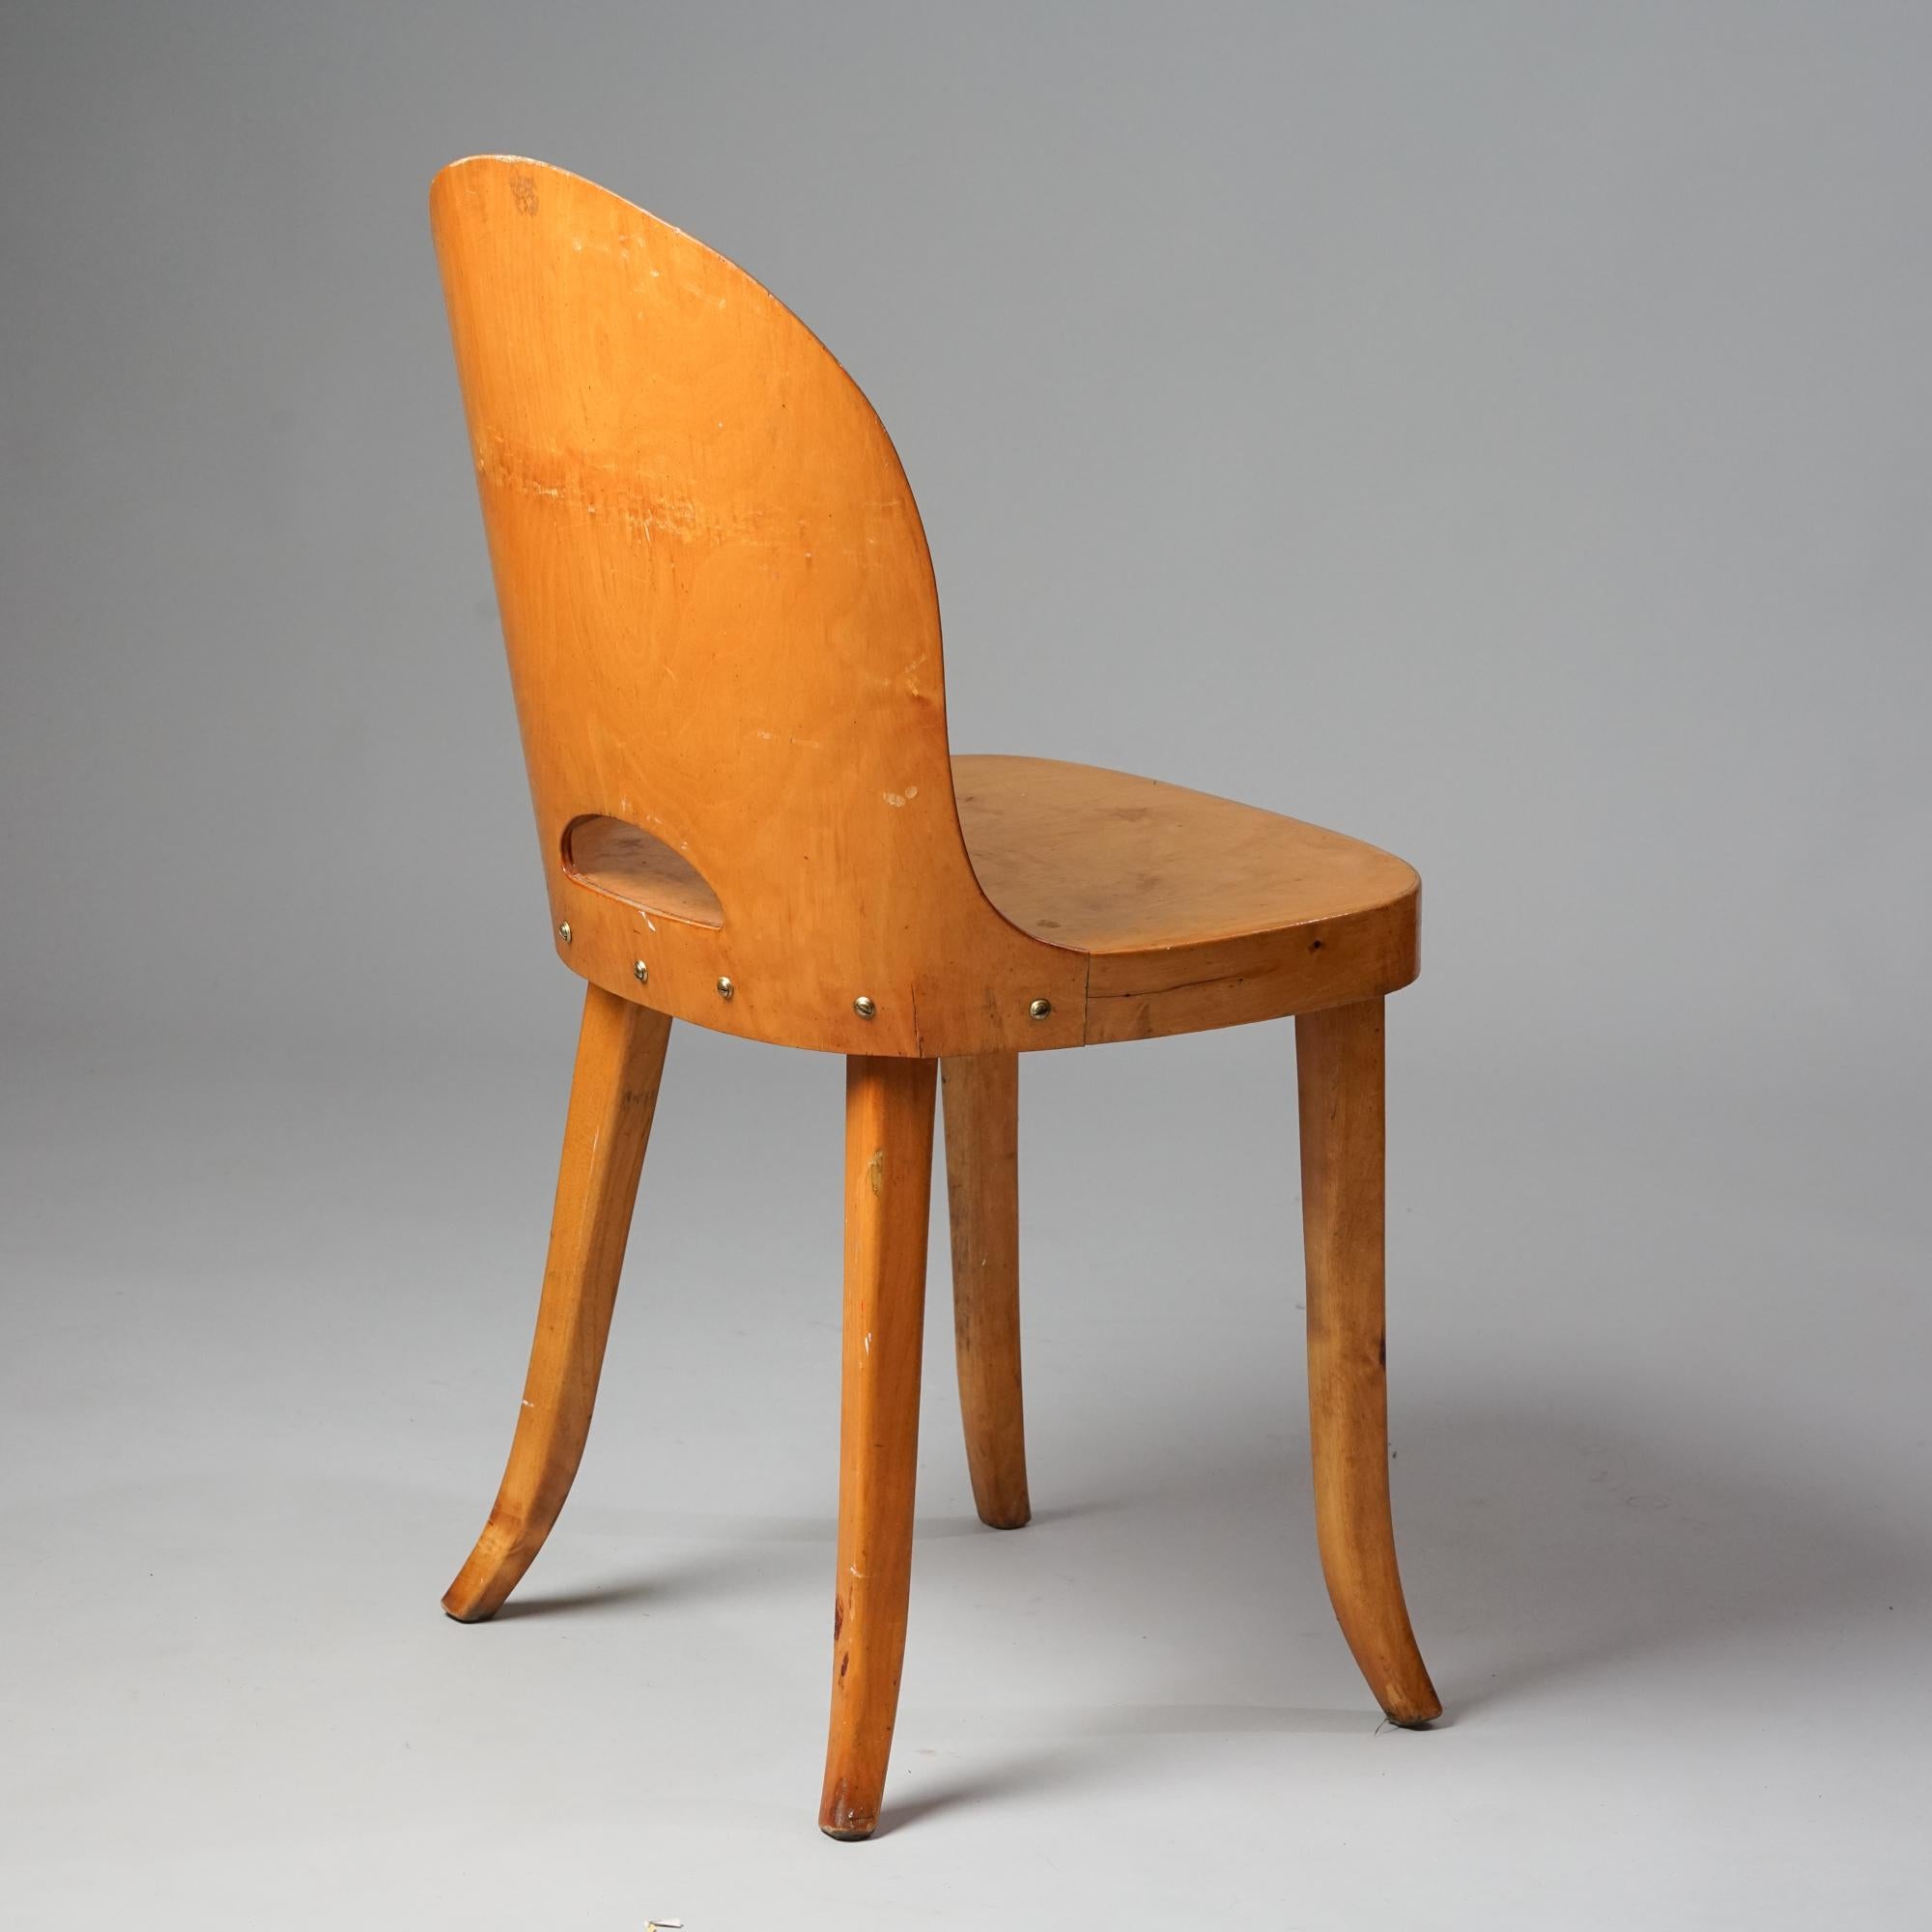 Finnish Sculptural Chair, Finland, 1940s For Sale